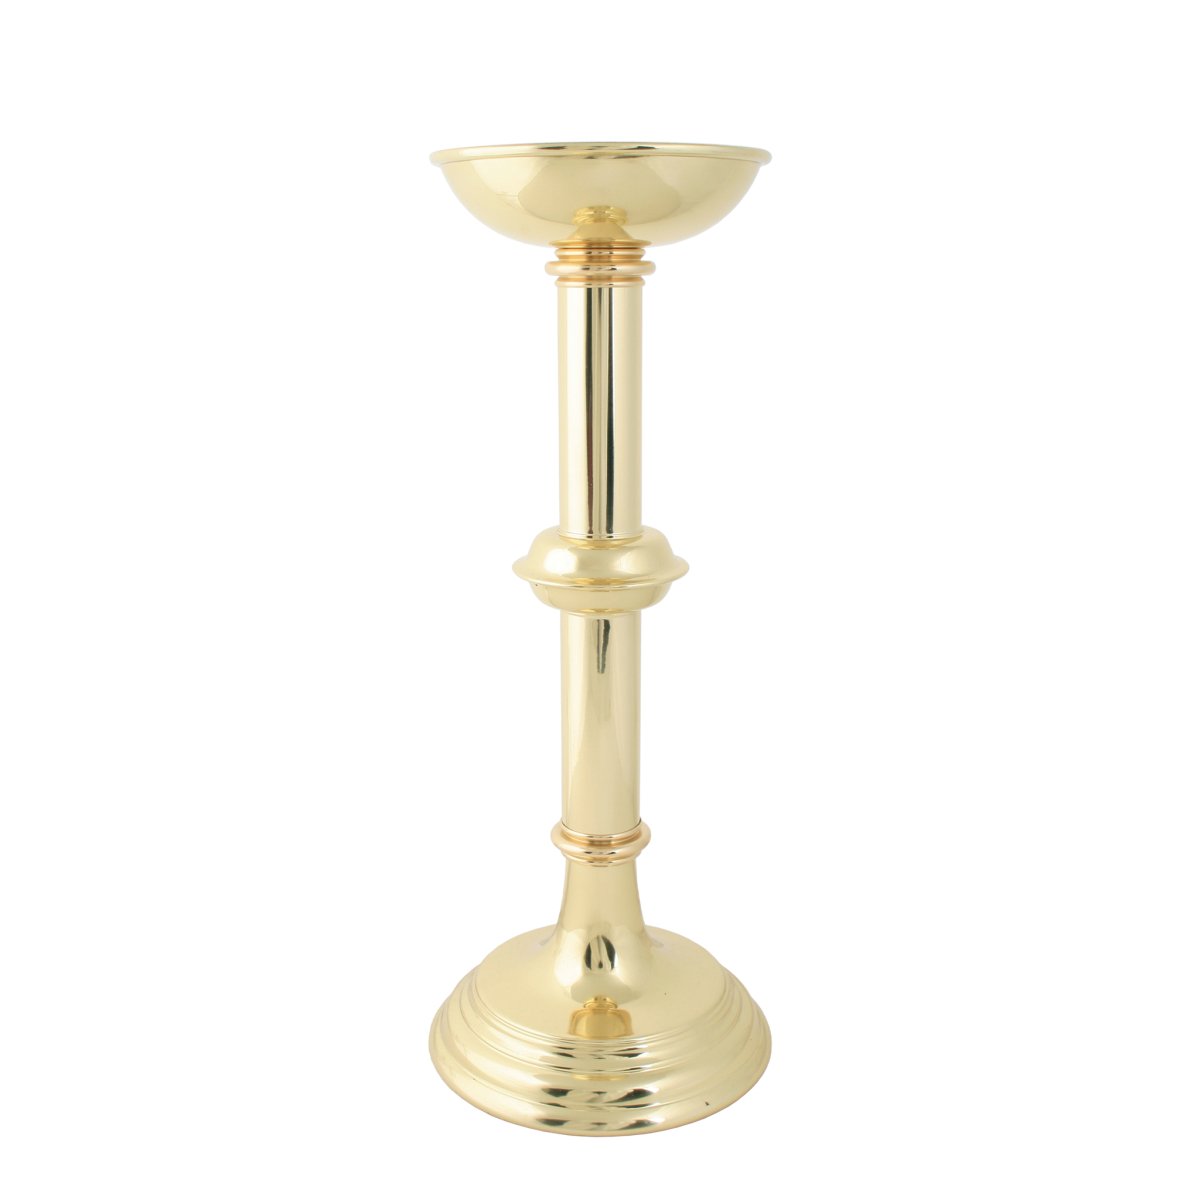 Dome Top Candlestick - Hayes & Finch